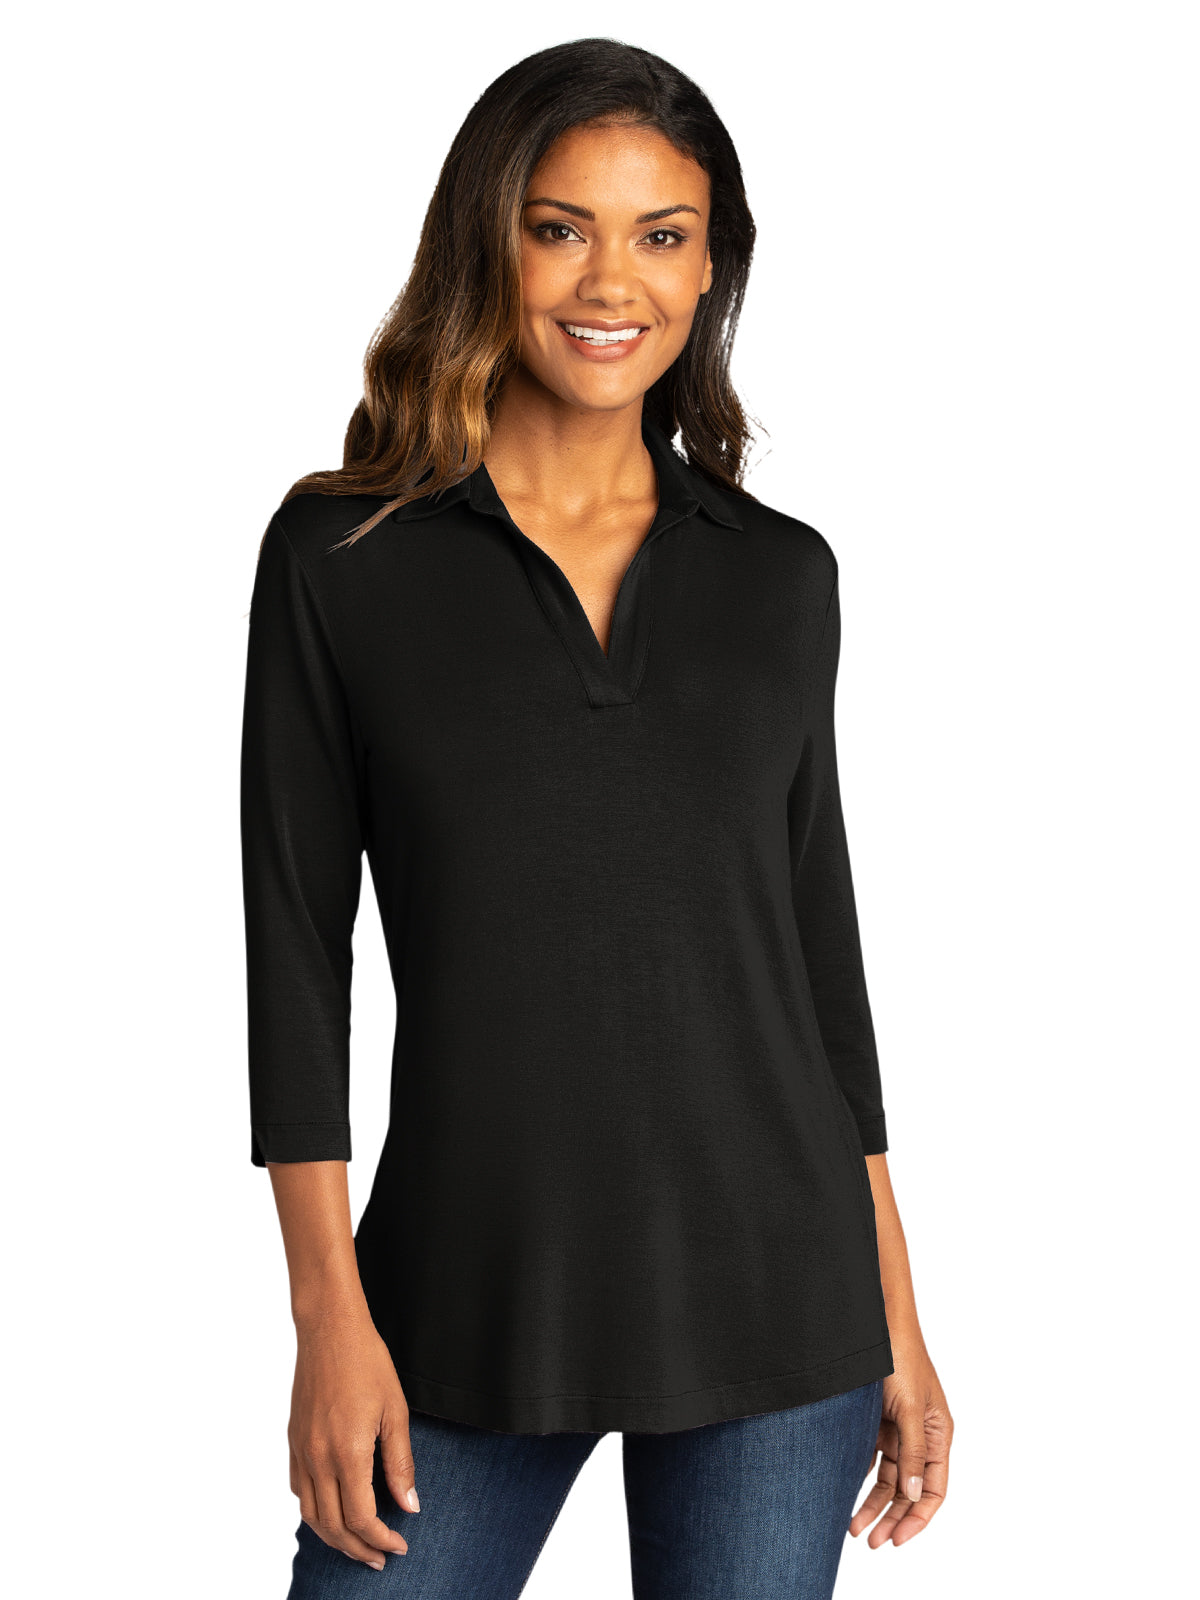 Ladies Luxe Knit Tunic